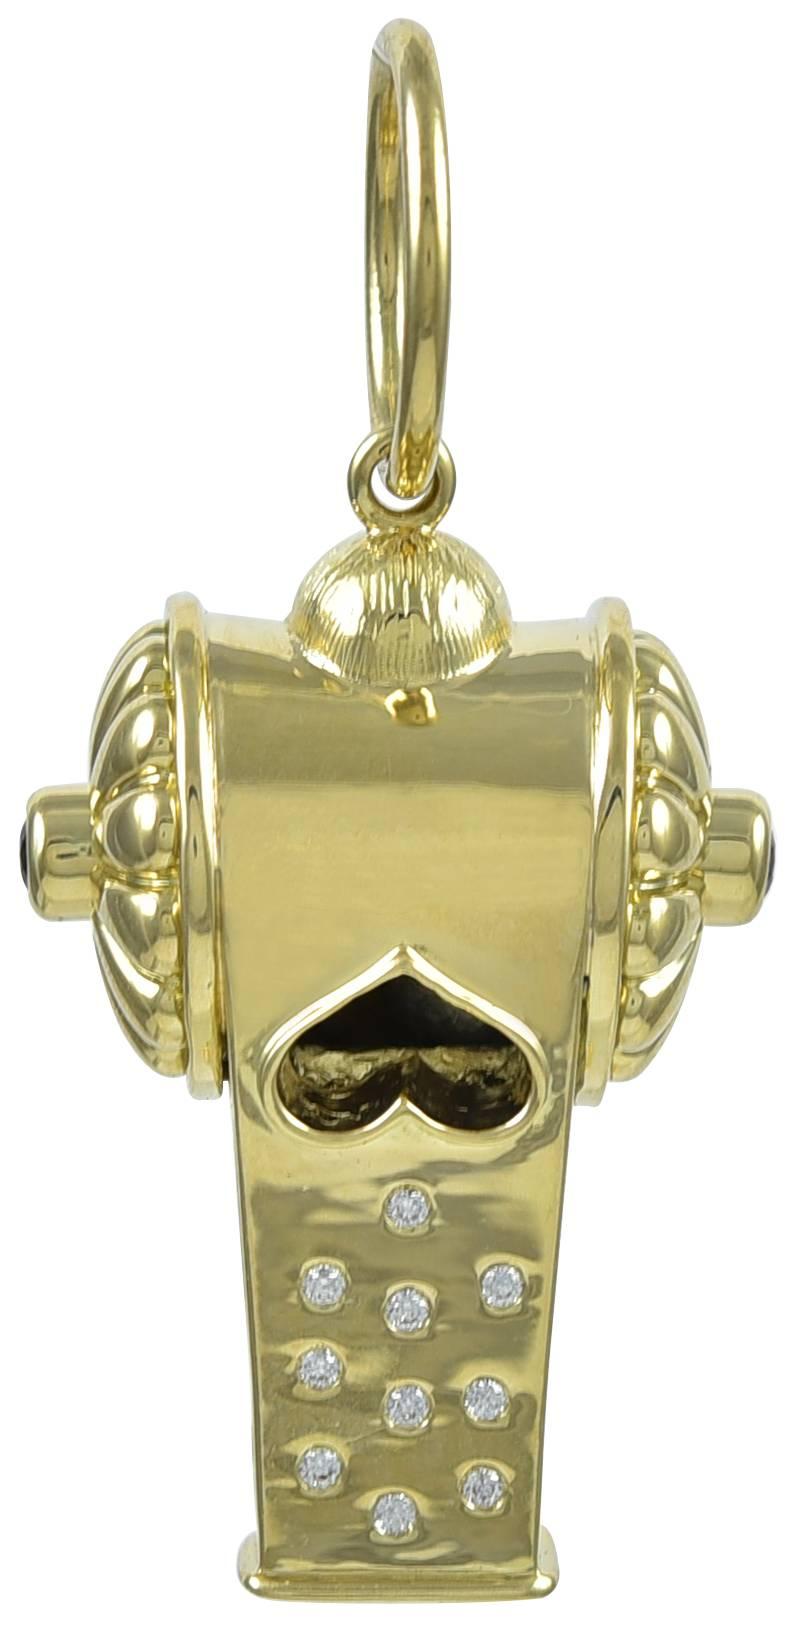 Striking figural whistle. Set in heavy gauge 18K yellow gold, with ten brilliant diamonds and two bright faceted rubies. 1-1/2